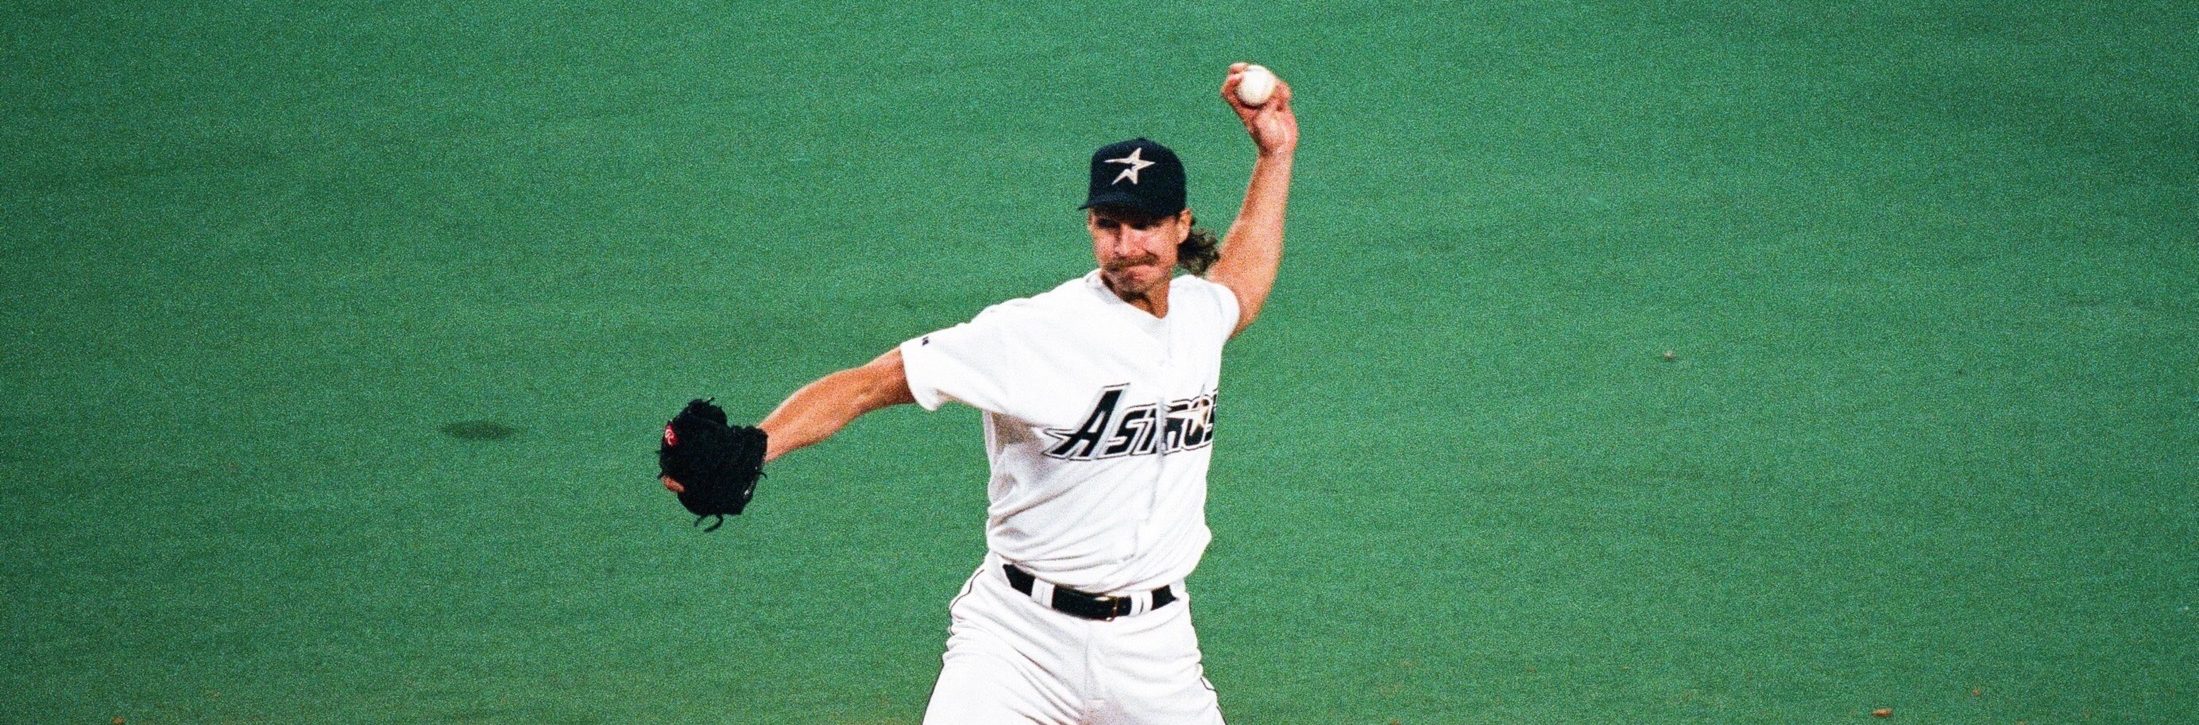 Astros Trade for Randy Johnson 20 Years Ago Shows Impact of Rental Players  - InsideHook